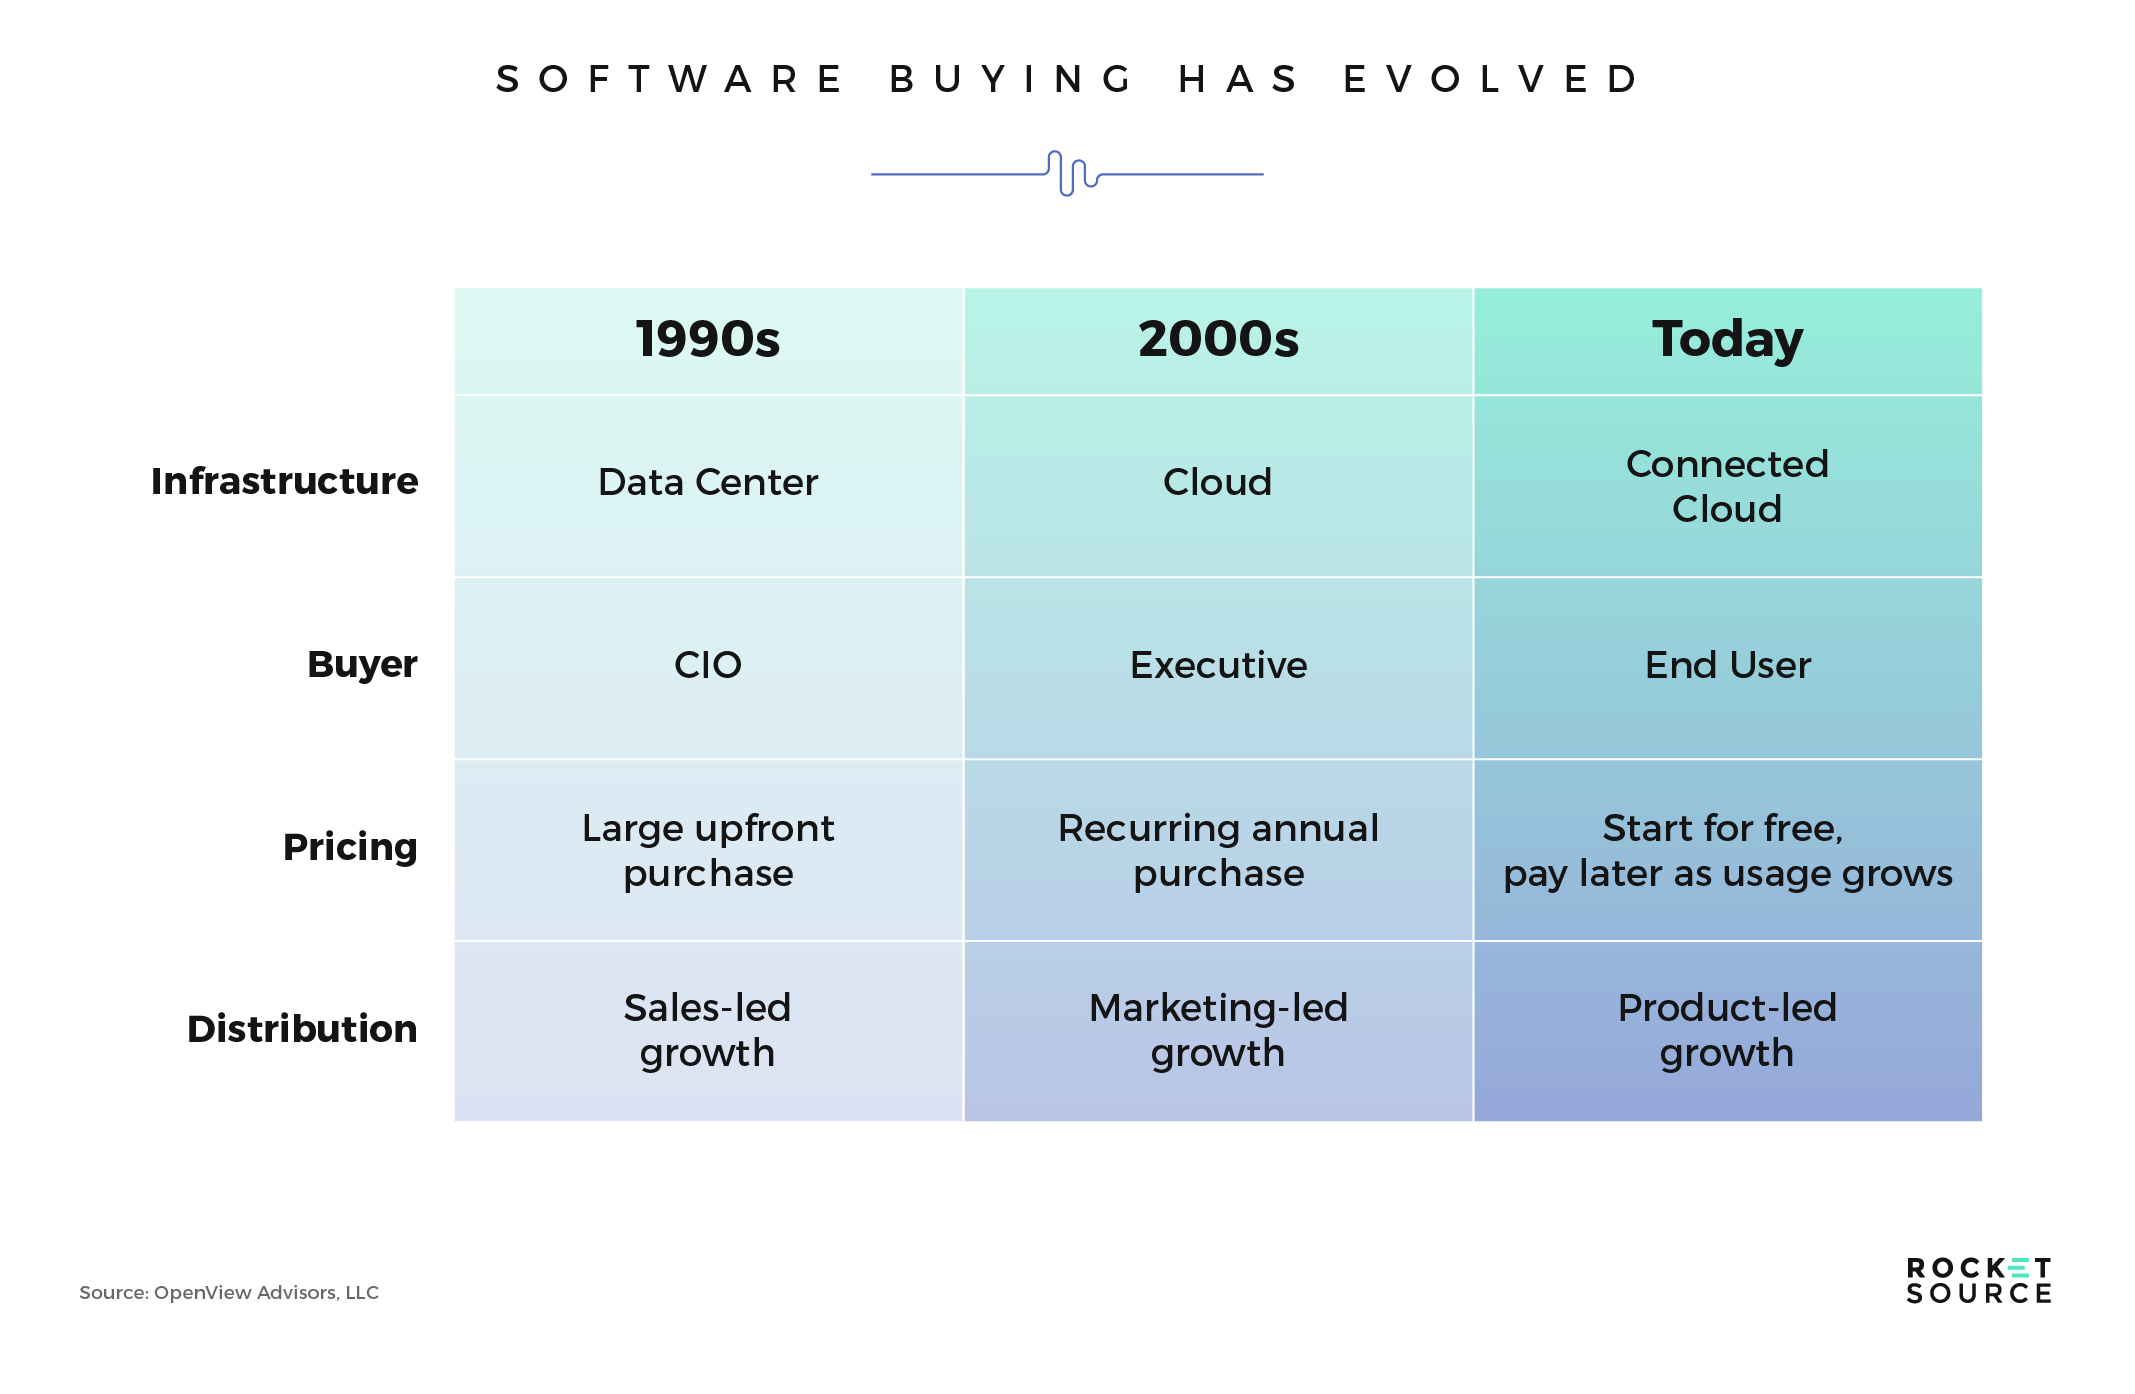 evolution of product led growth in software